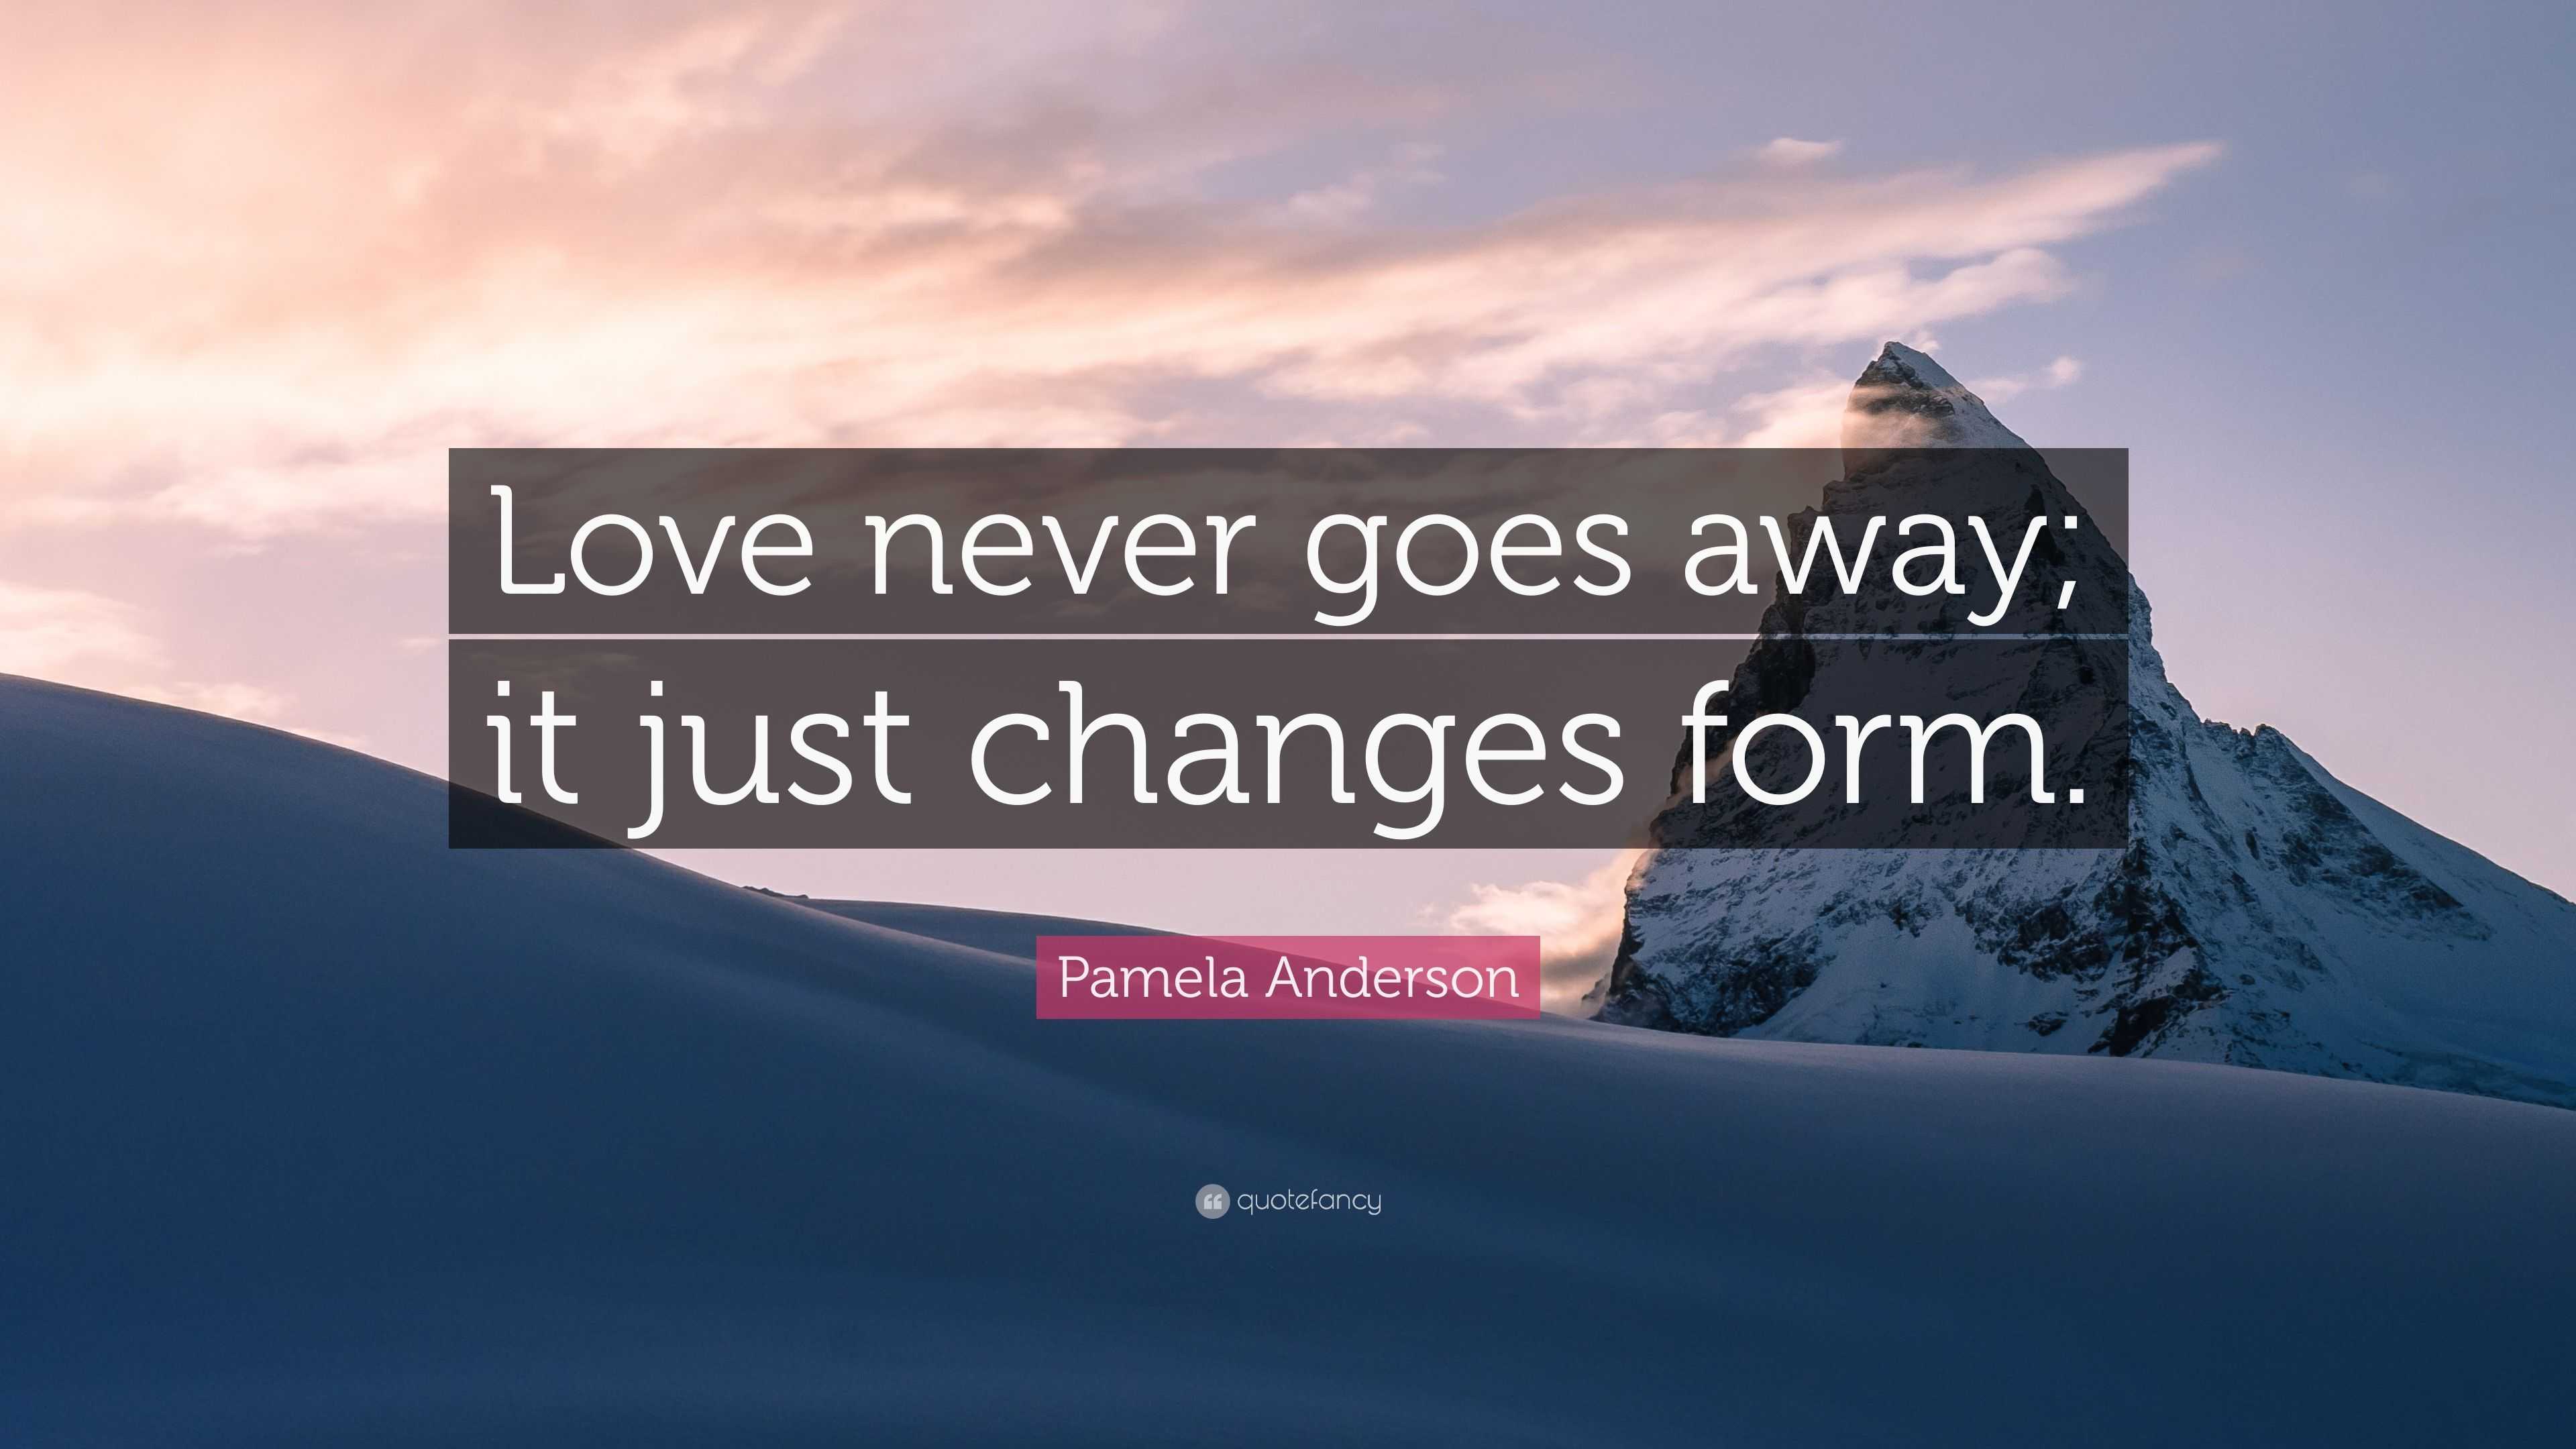 Pamela Anderson Quote “Love never goes away it just changes form ”